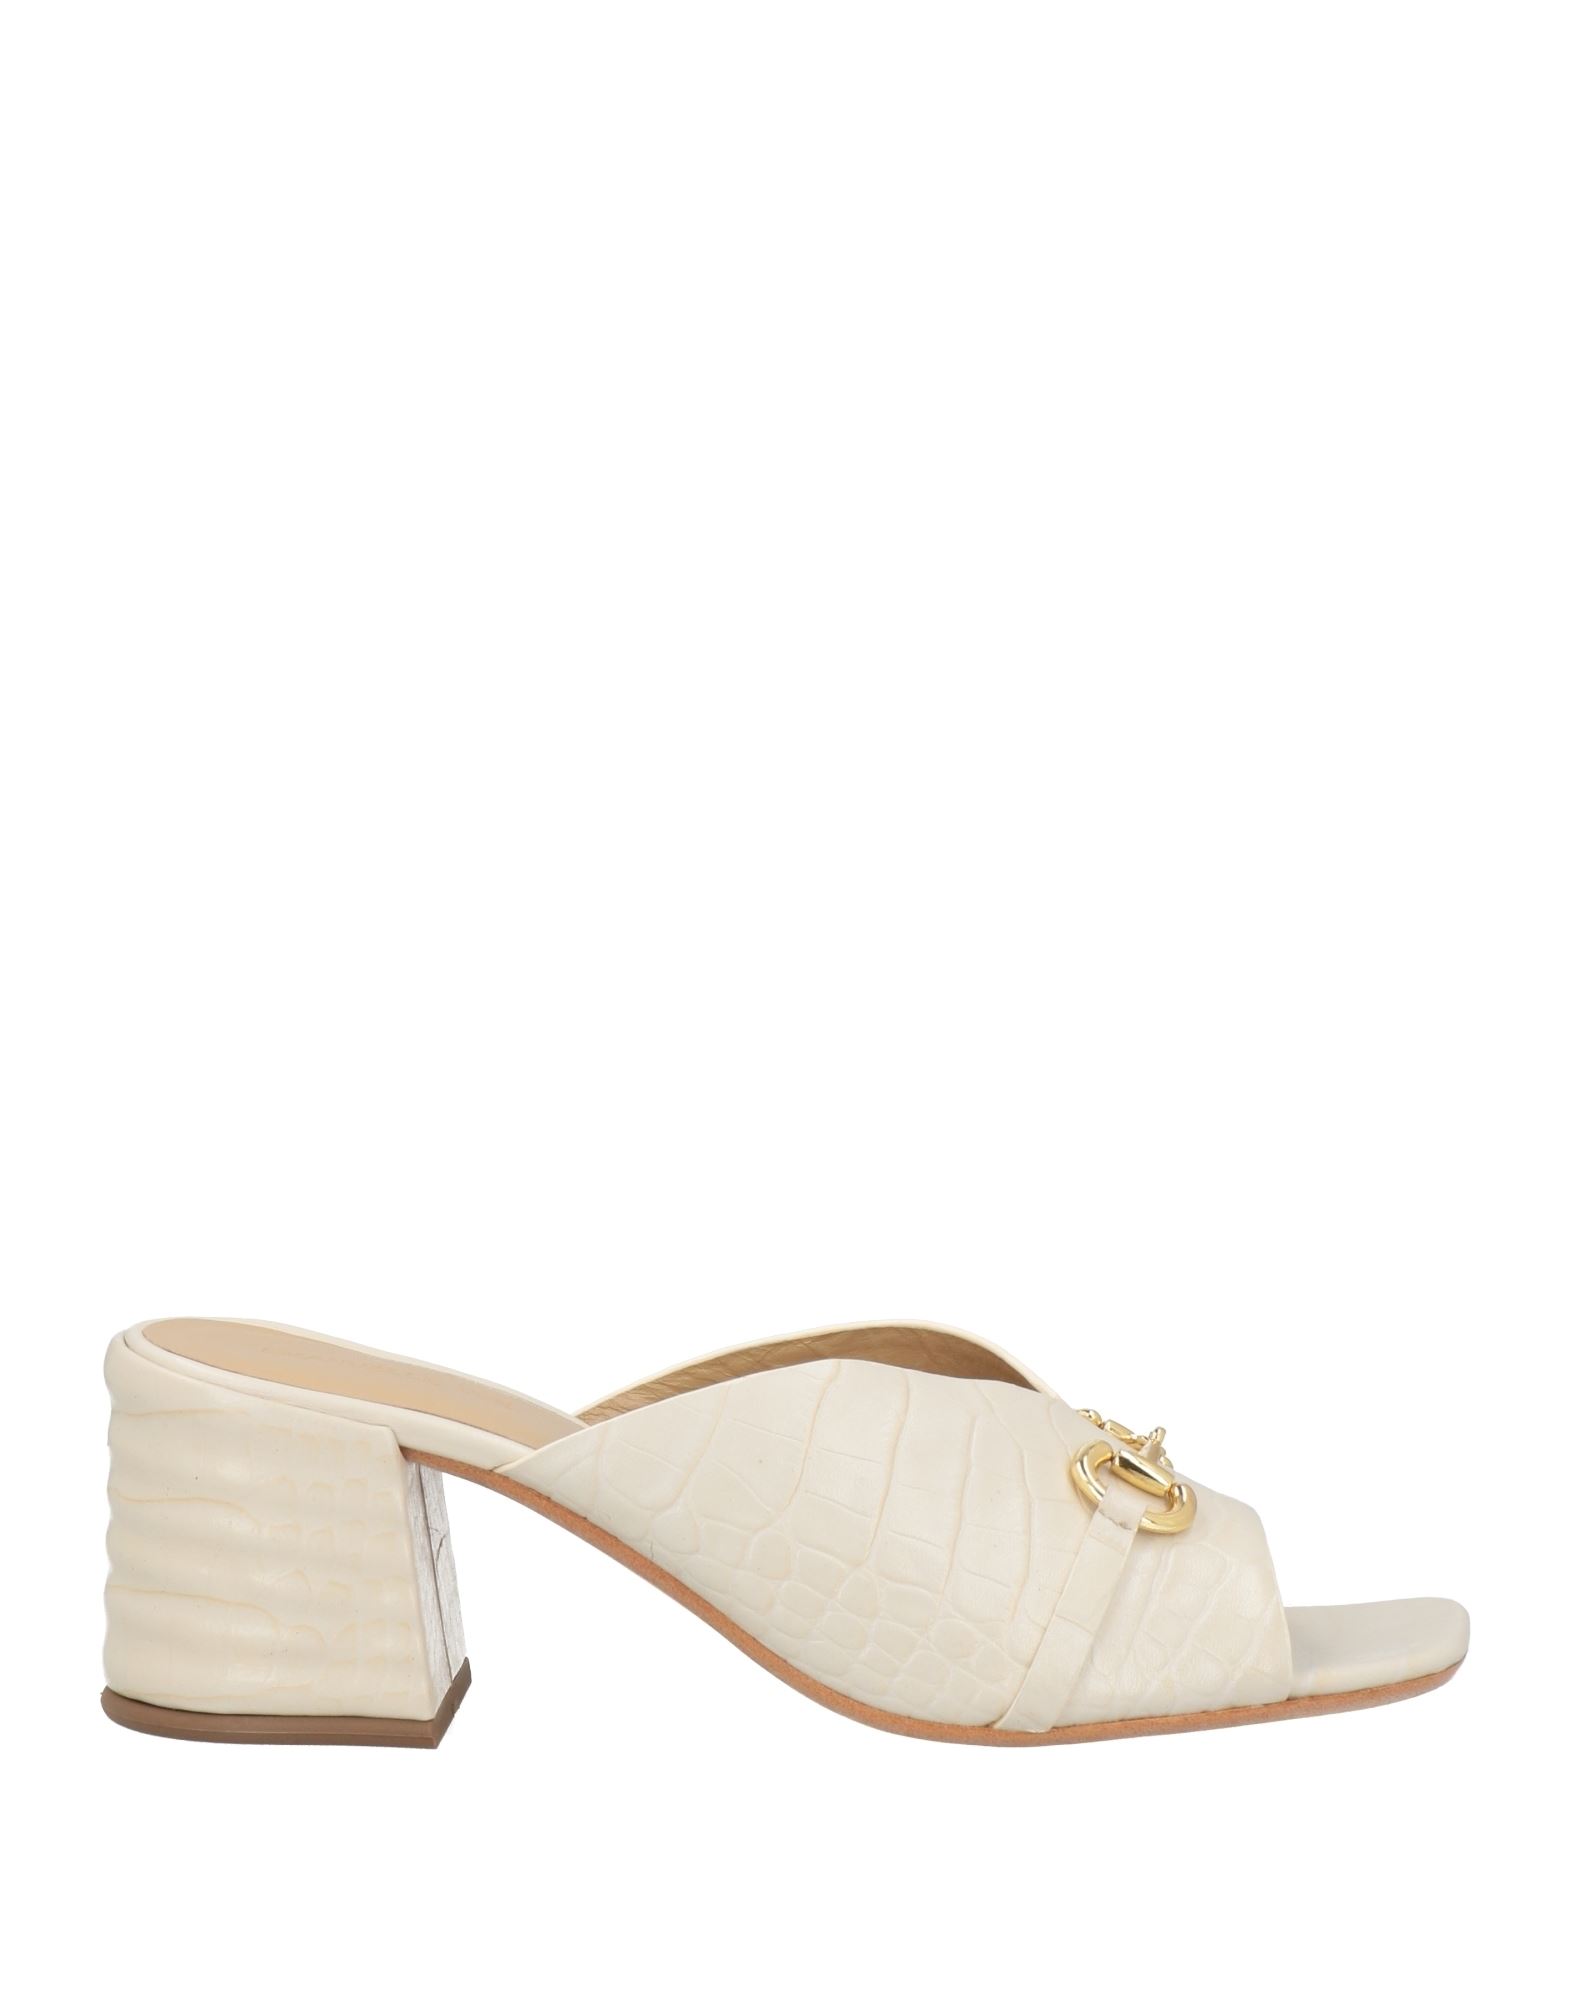 Emanuélle Vee Woman Sandals Ivory Size 7 Soft Leather In White